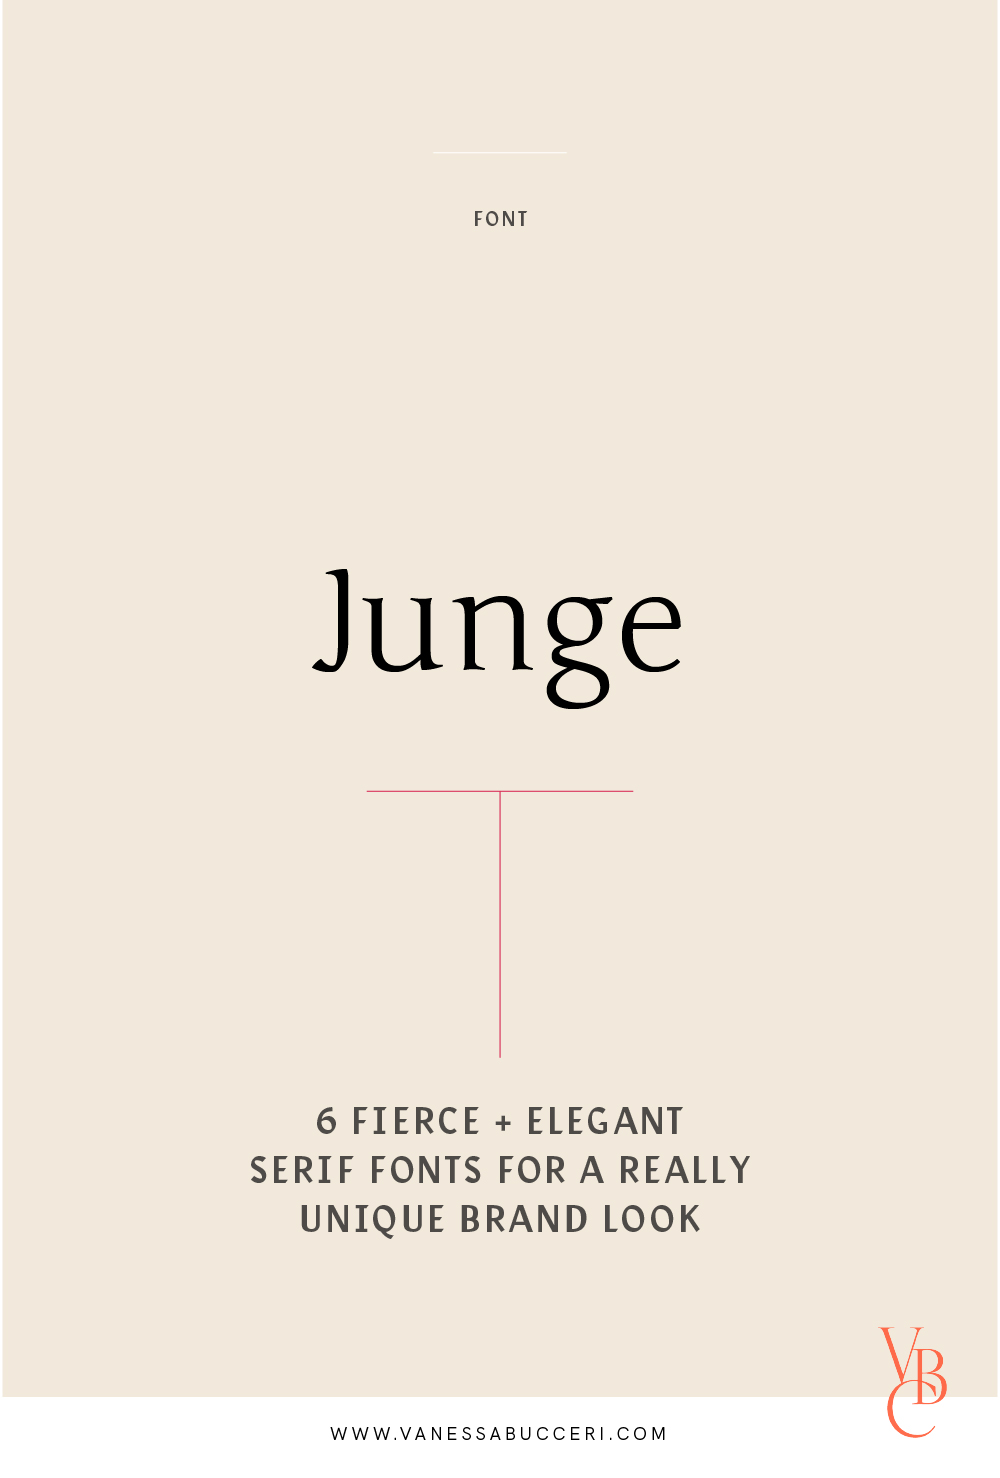 Free and Elegant serif font Junge for a luxury brand look